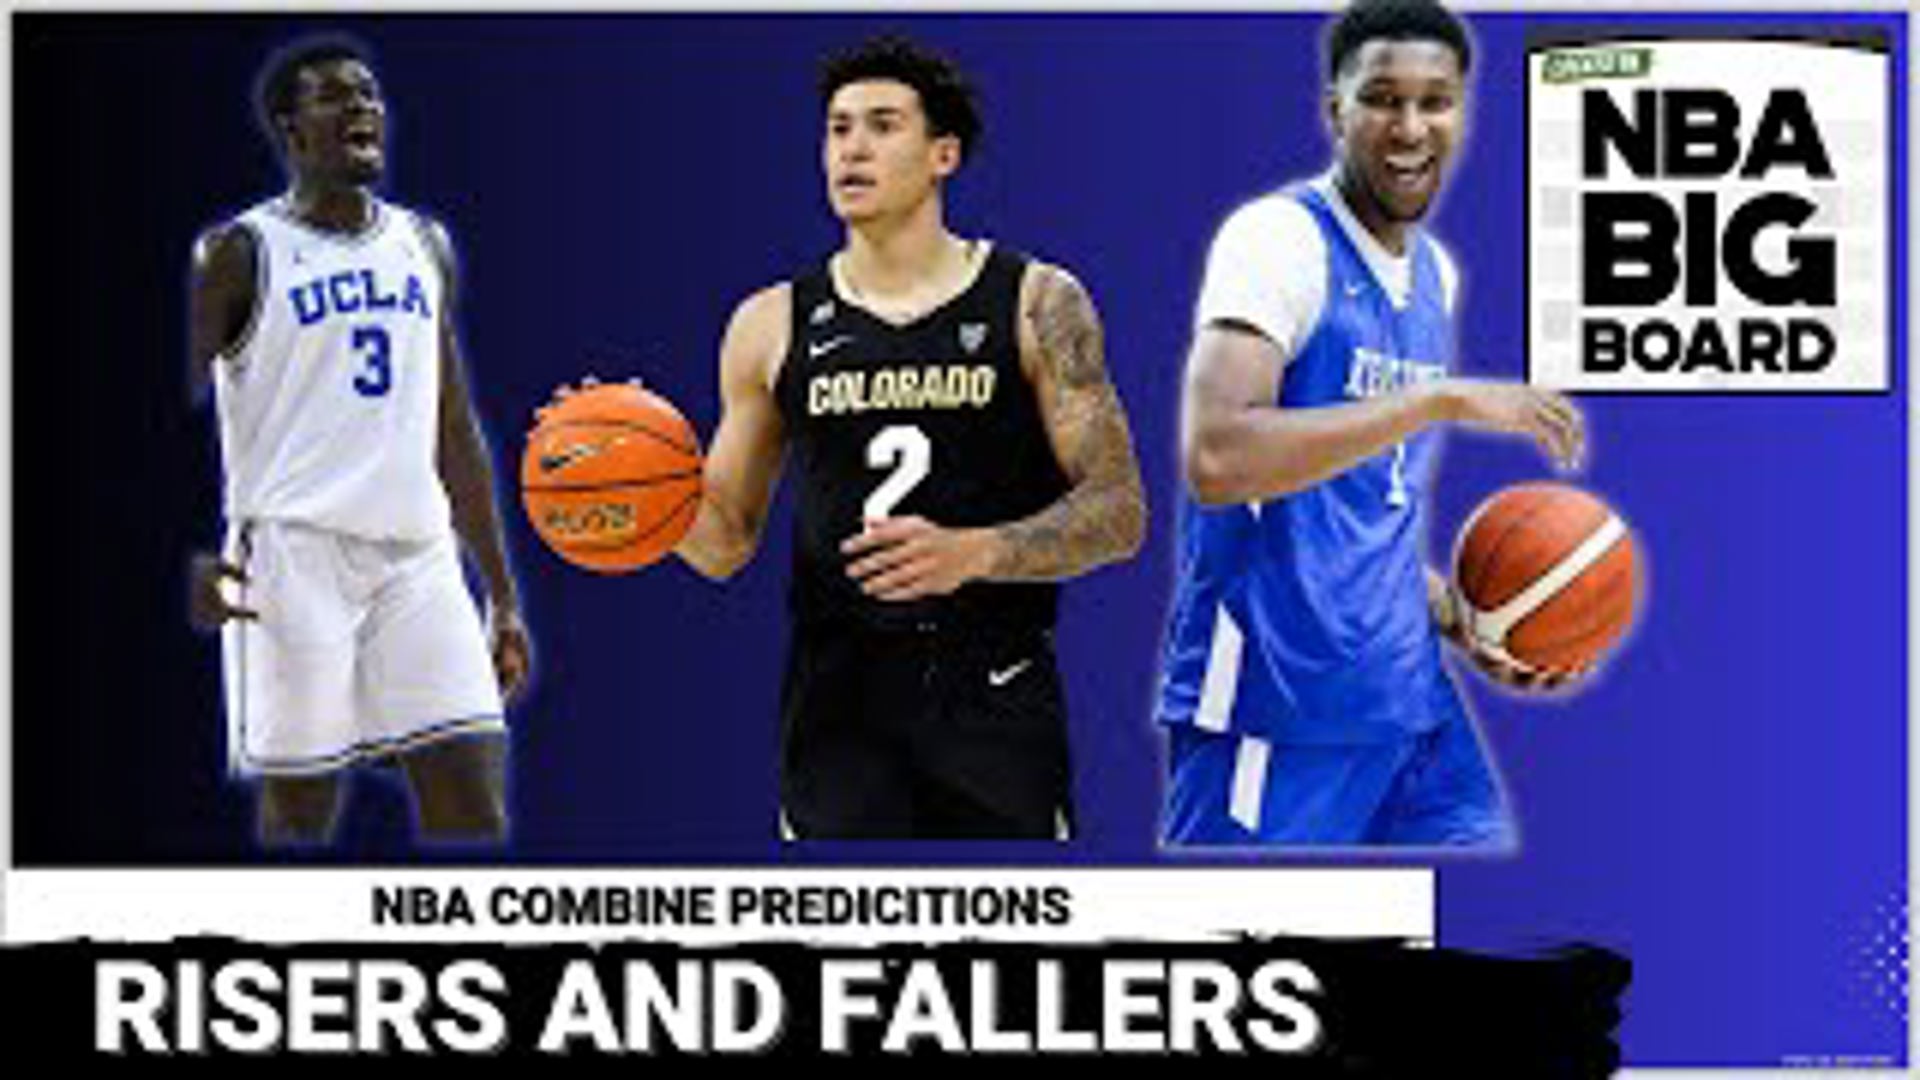 Leif Thulin and Richard Stayman analyze the performances from prospects who shined in the scrimmages held on day 2 at the NBA Combine.